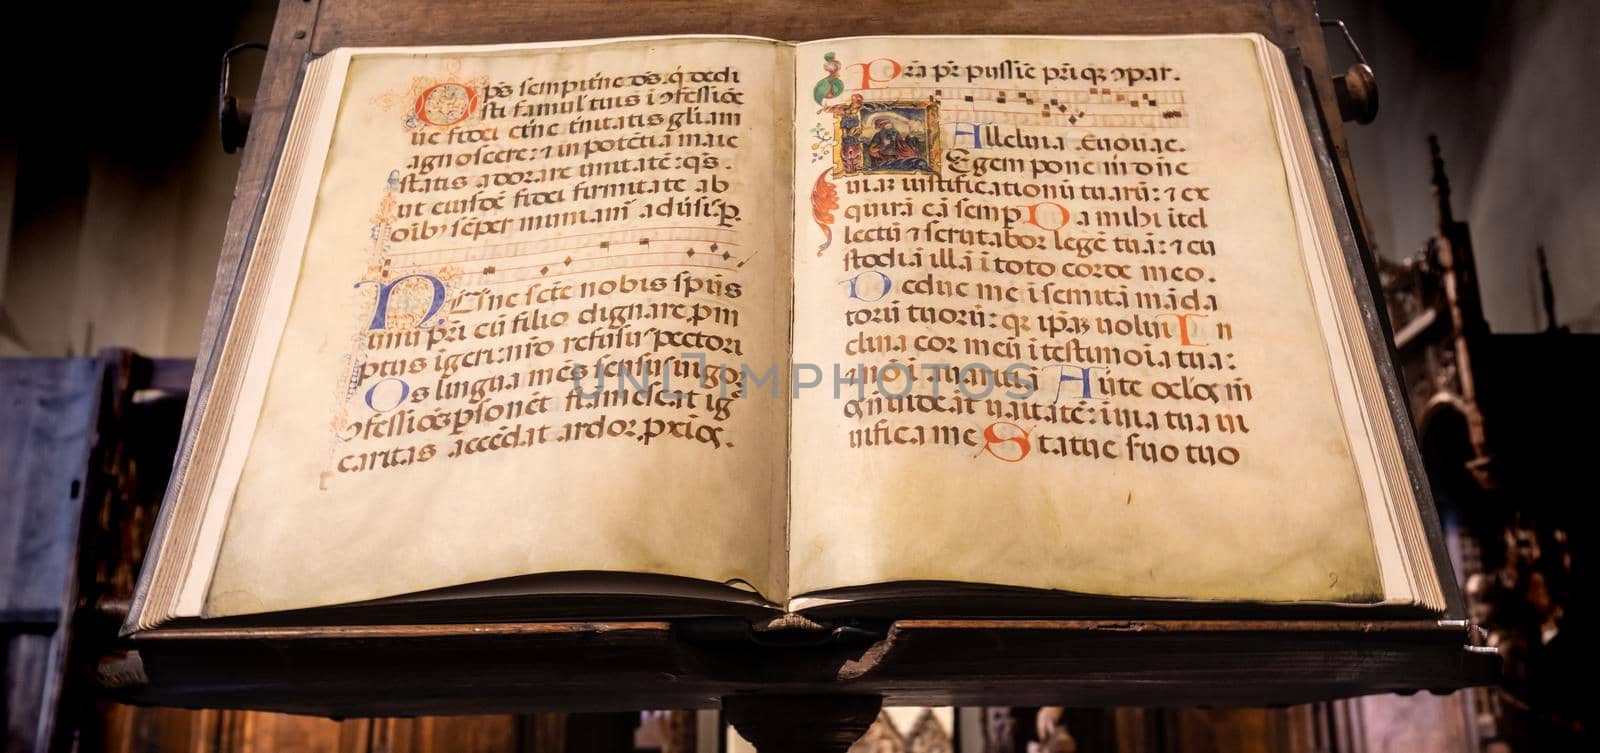 TURIN, ITALY - CIRCA MAY 2021: antique Medieval manuscript with ancient calligraphy.